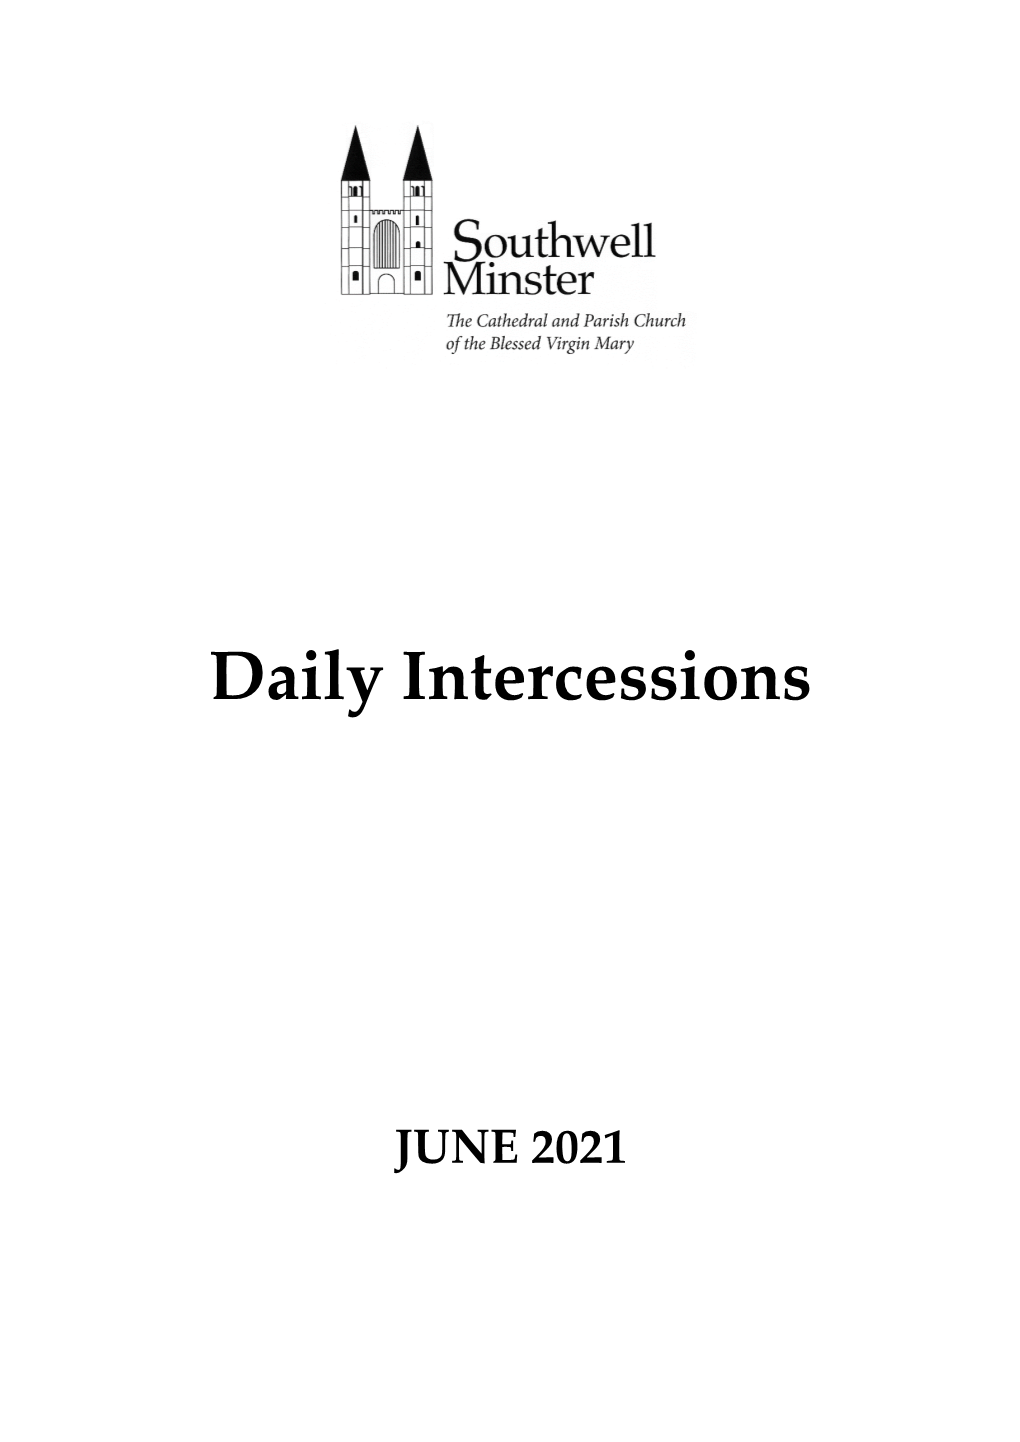 Daily Intercessions